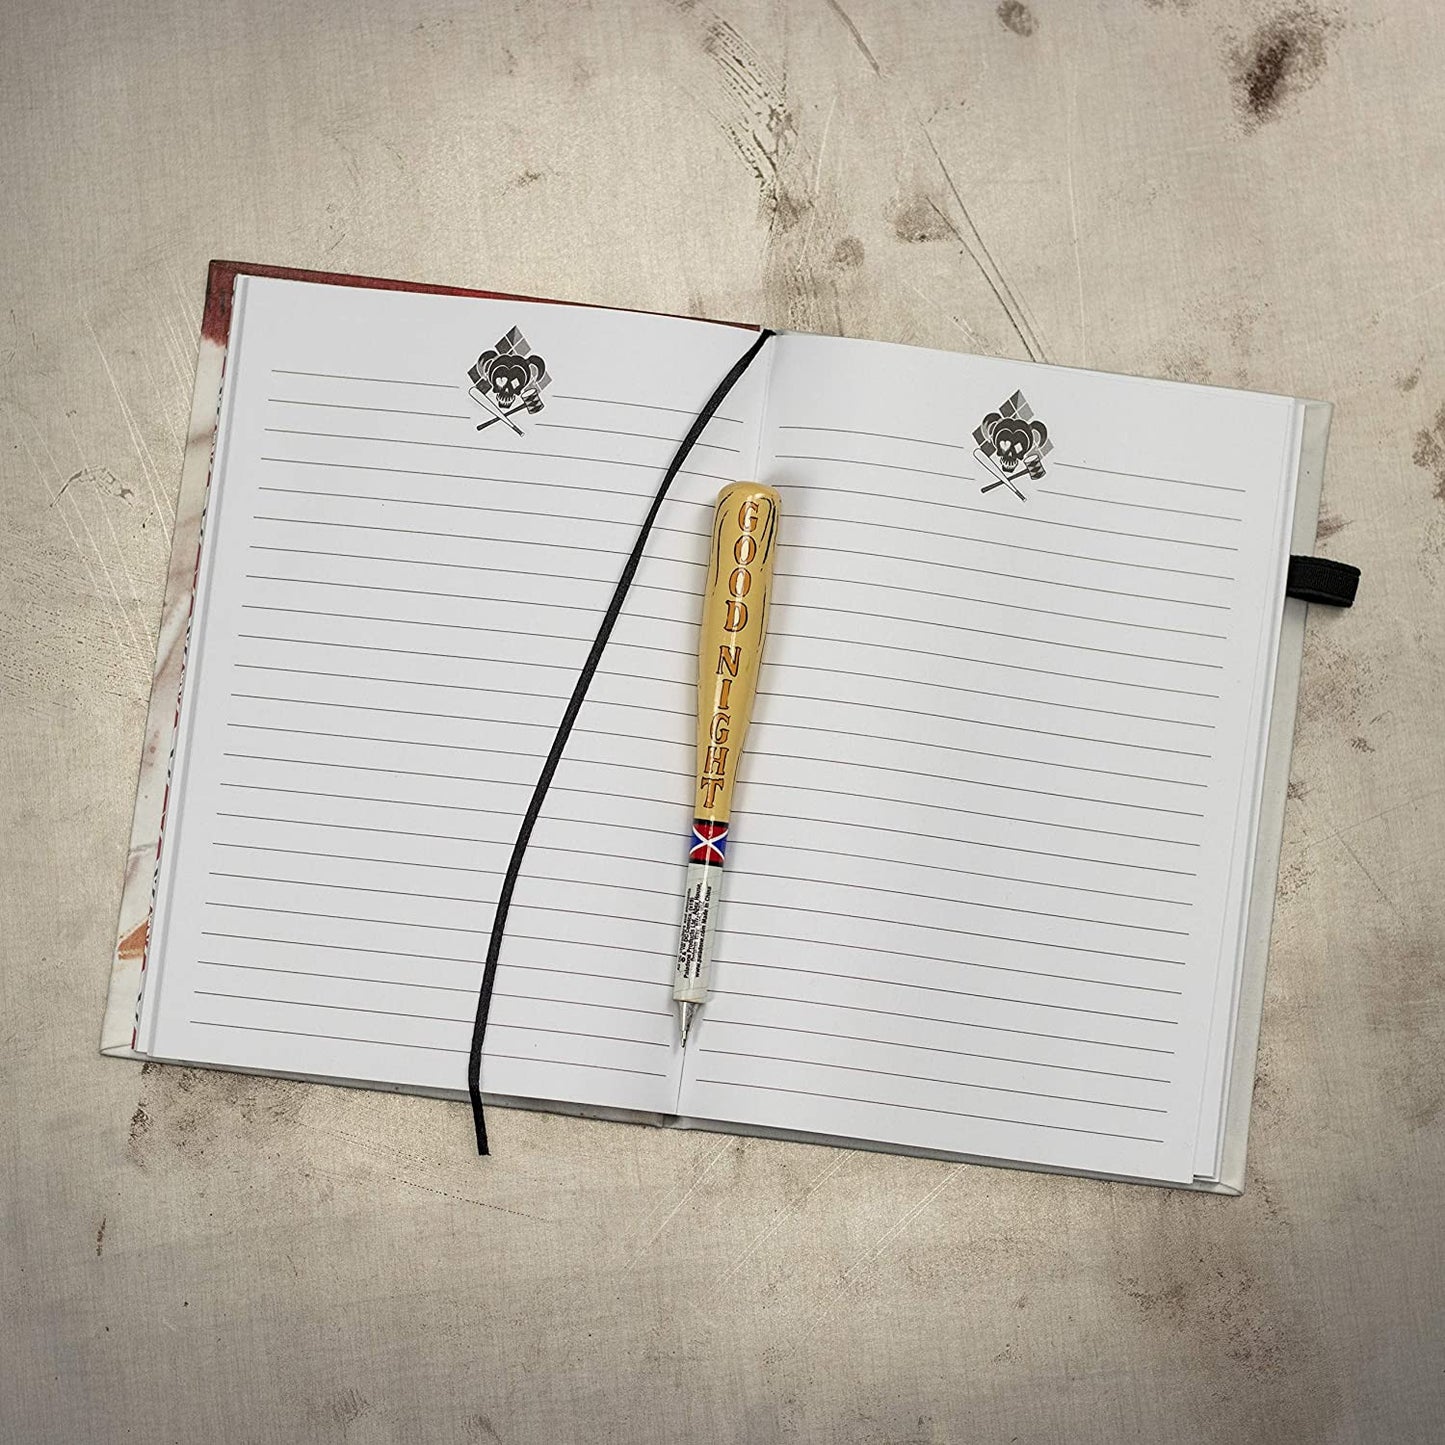 Harley Quinn Suicide Squad Notebook and Pen Set